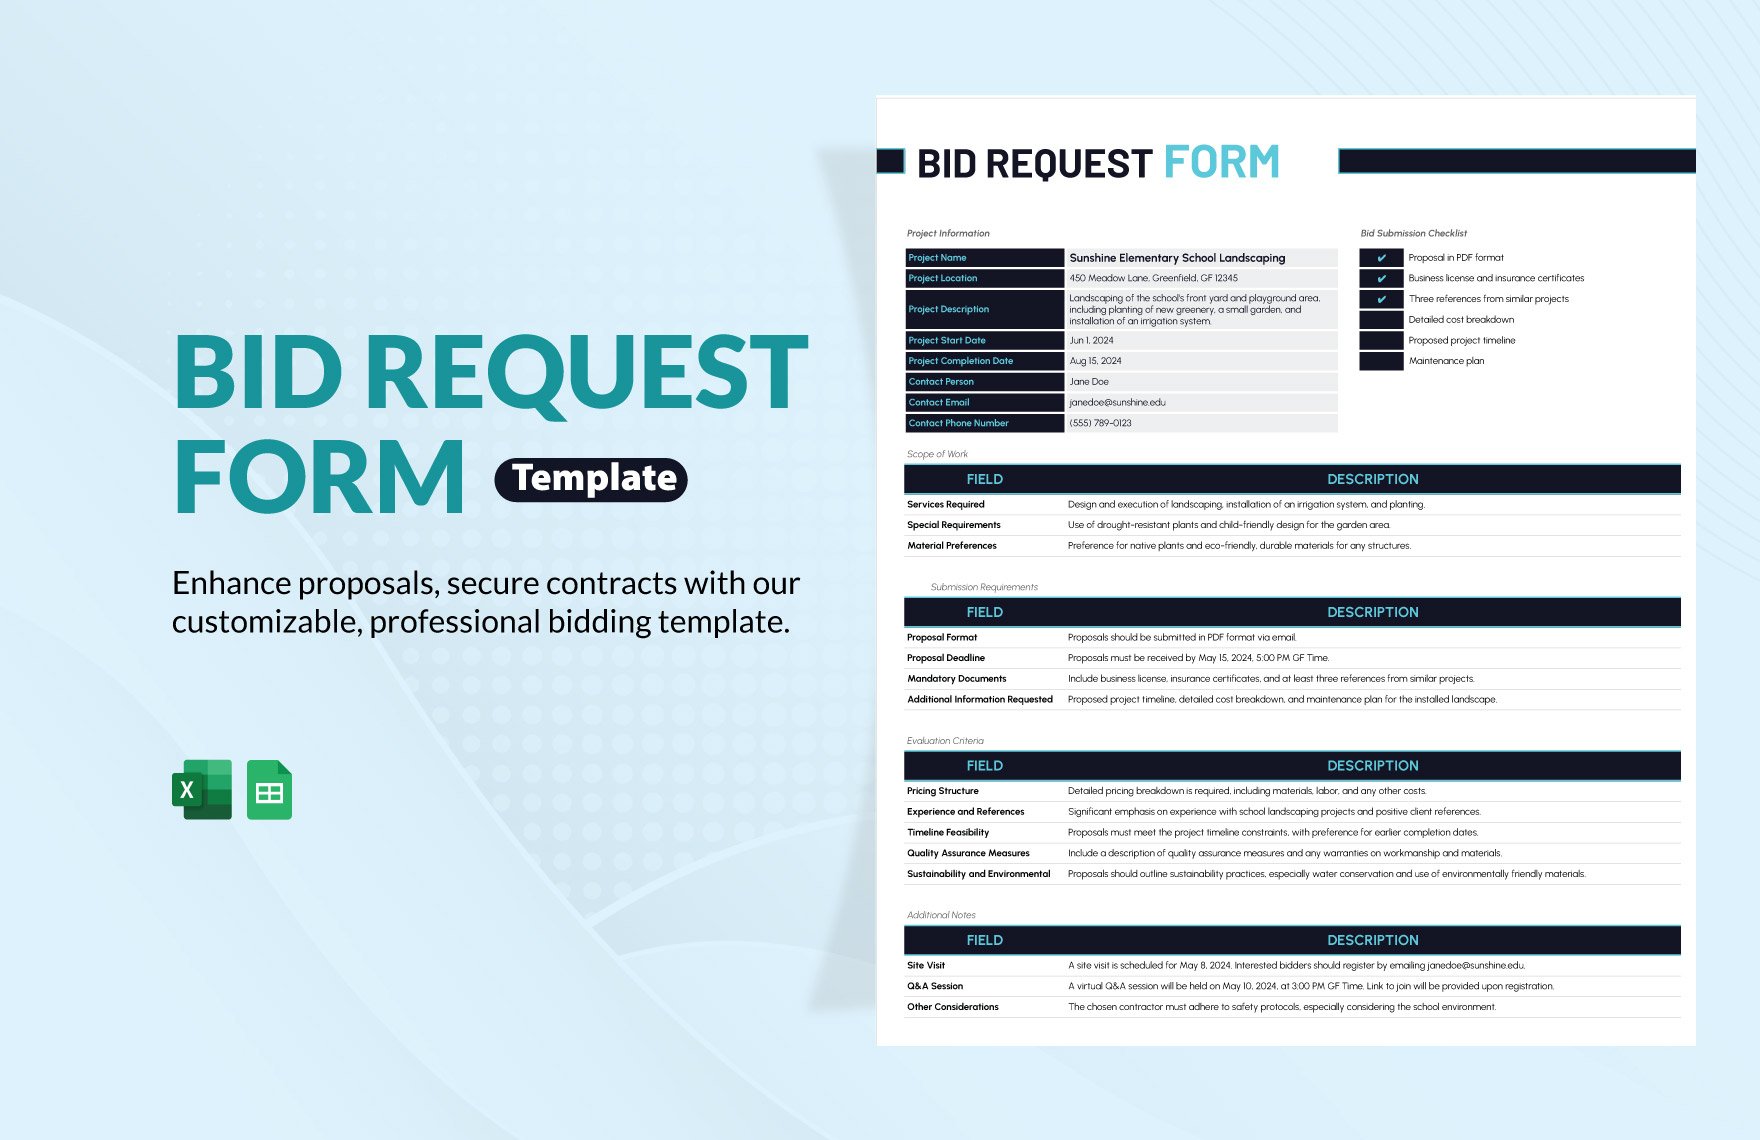 Bid Request Form Template in Excel, Google Sheets